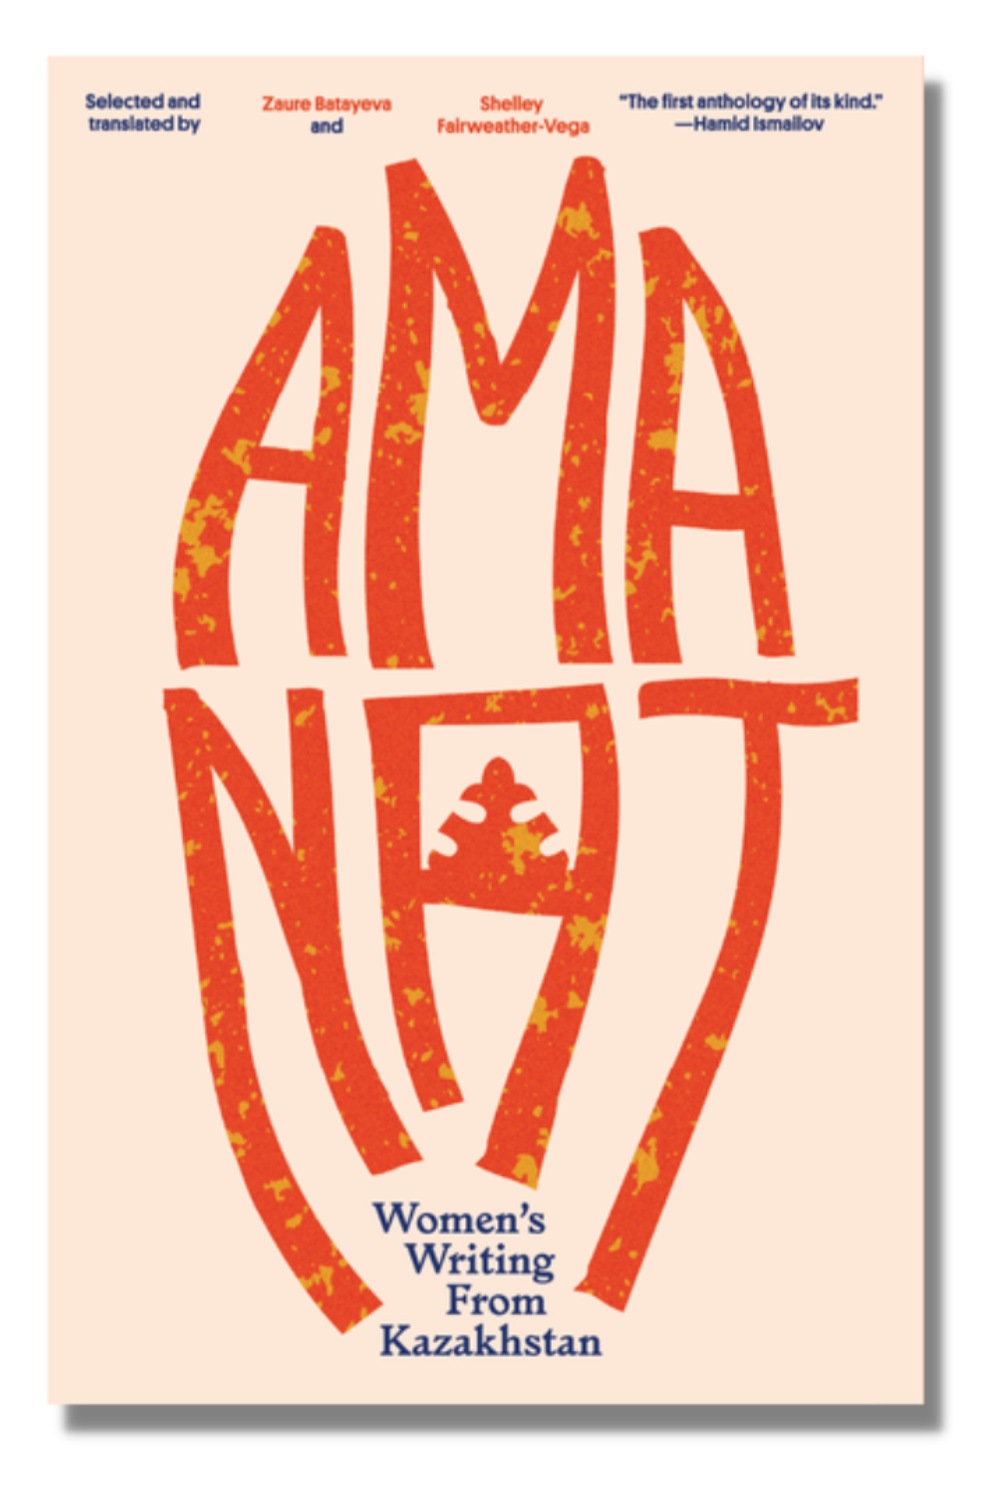 The cover of "Amanat: Women's Writing from Kazakhstan"